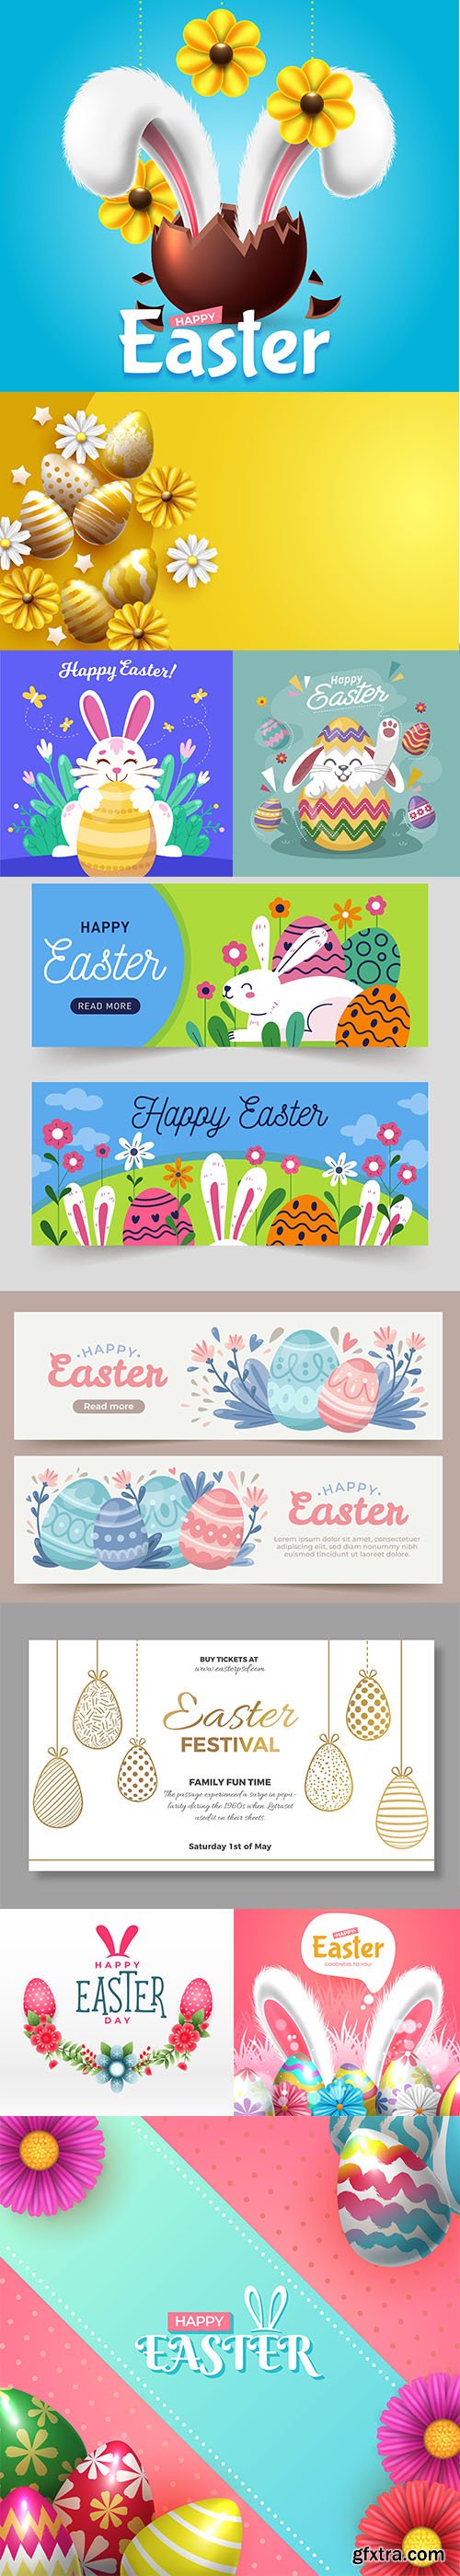 Hand-drawn cute easter illustrations and banner